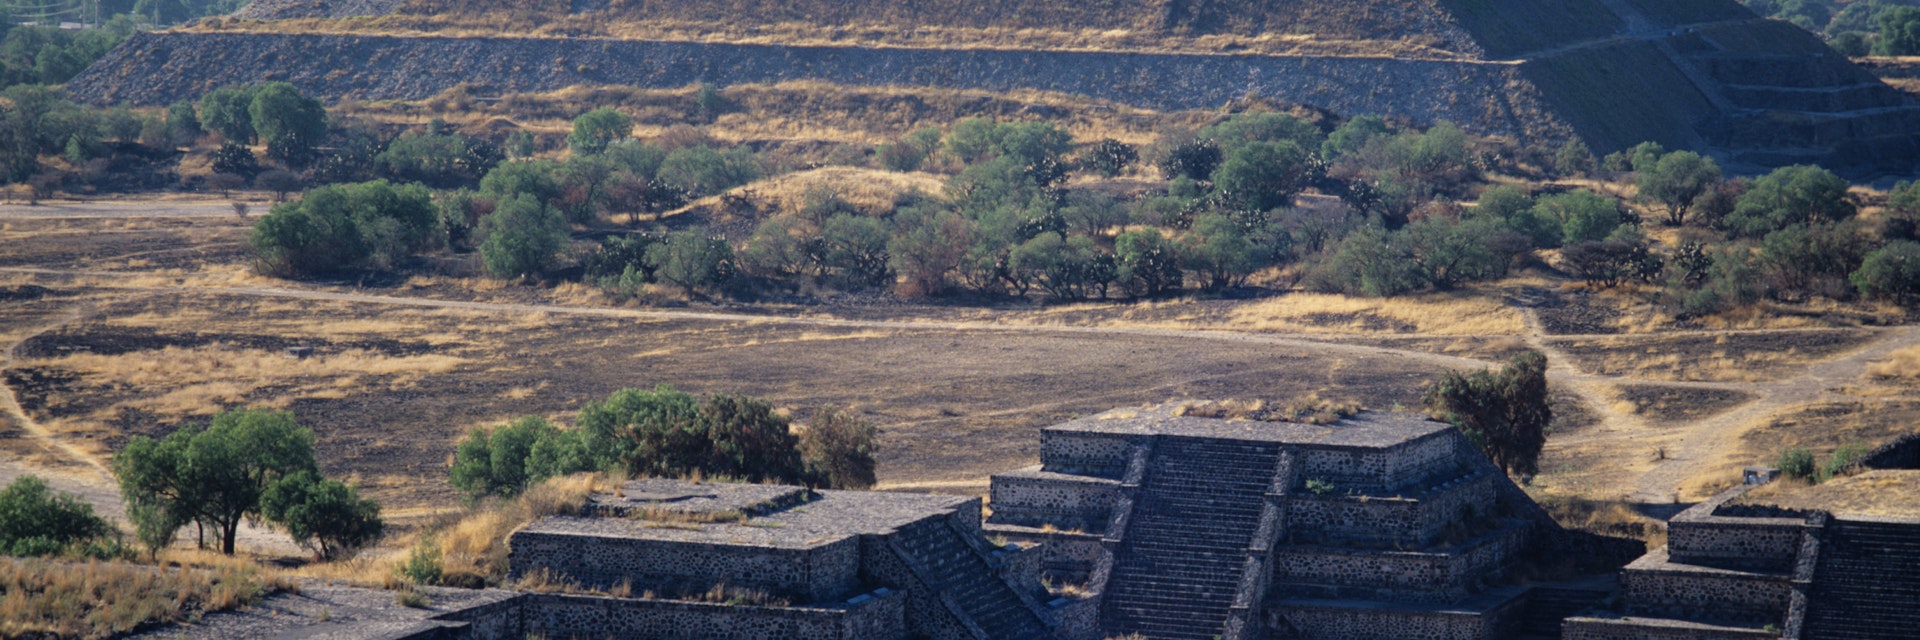 Prehistoric city of Teotihuacan in Mexico